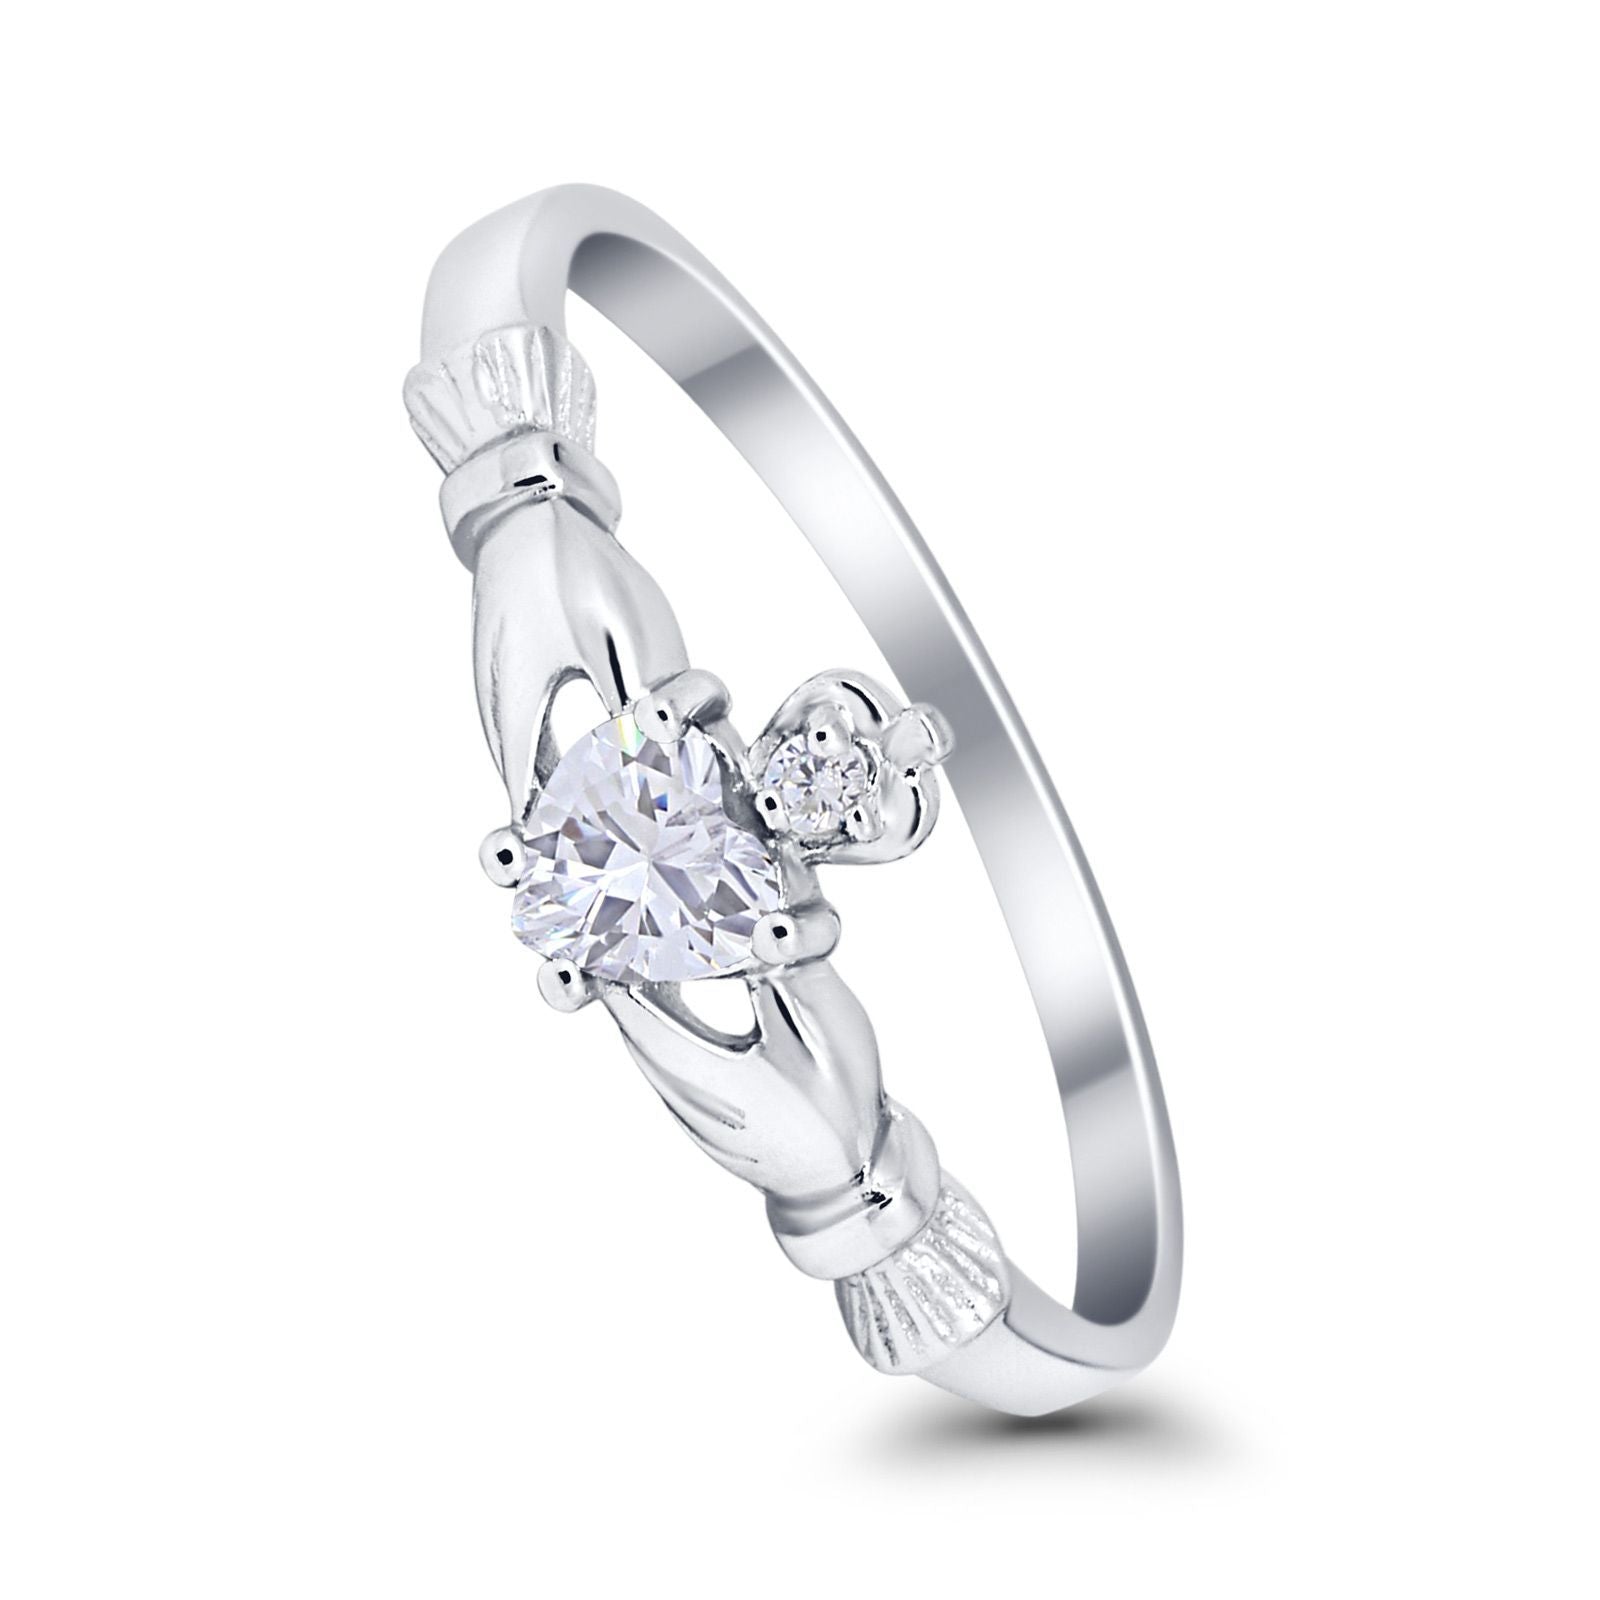 Claddagh Heart Promise Ring Simulated Cubic Zirconia 925 Sterling Silver